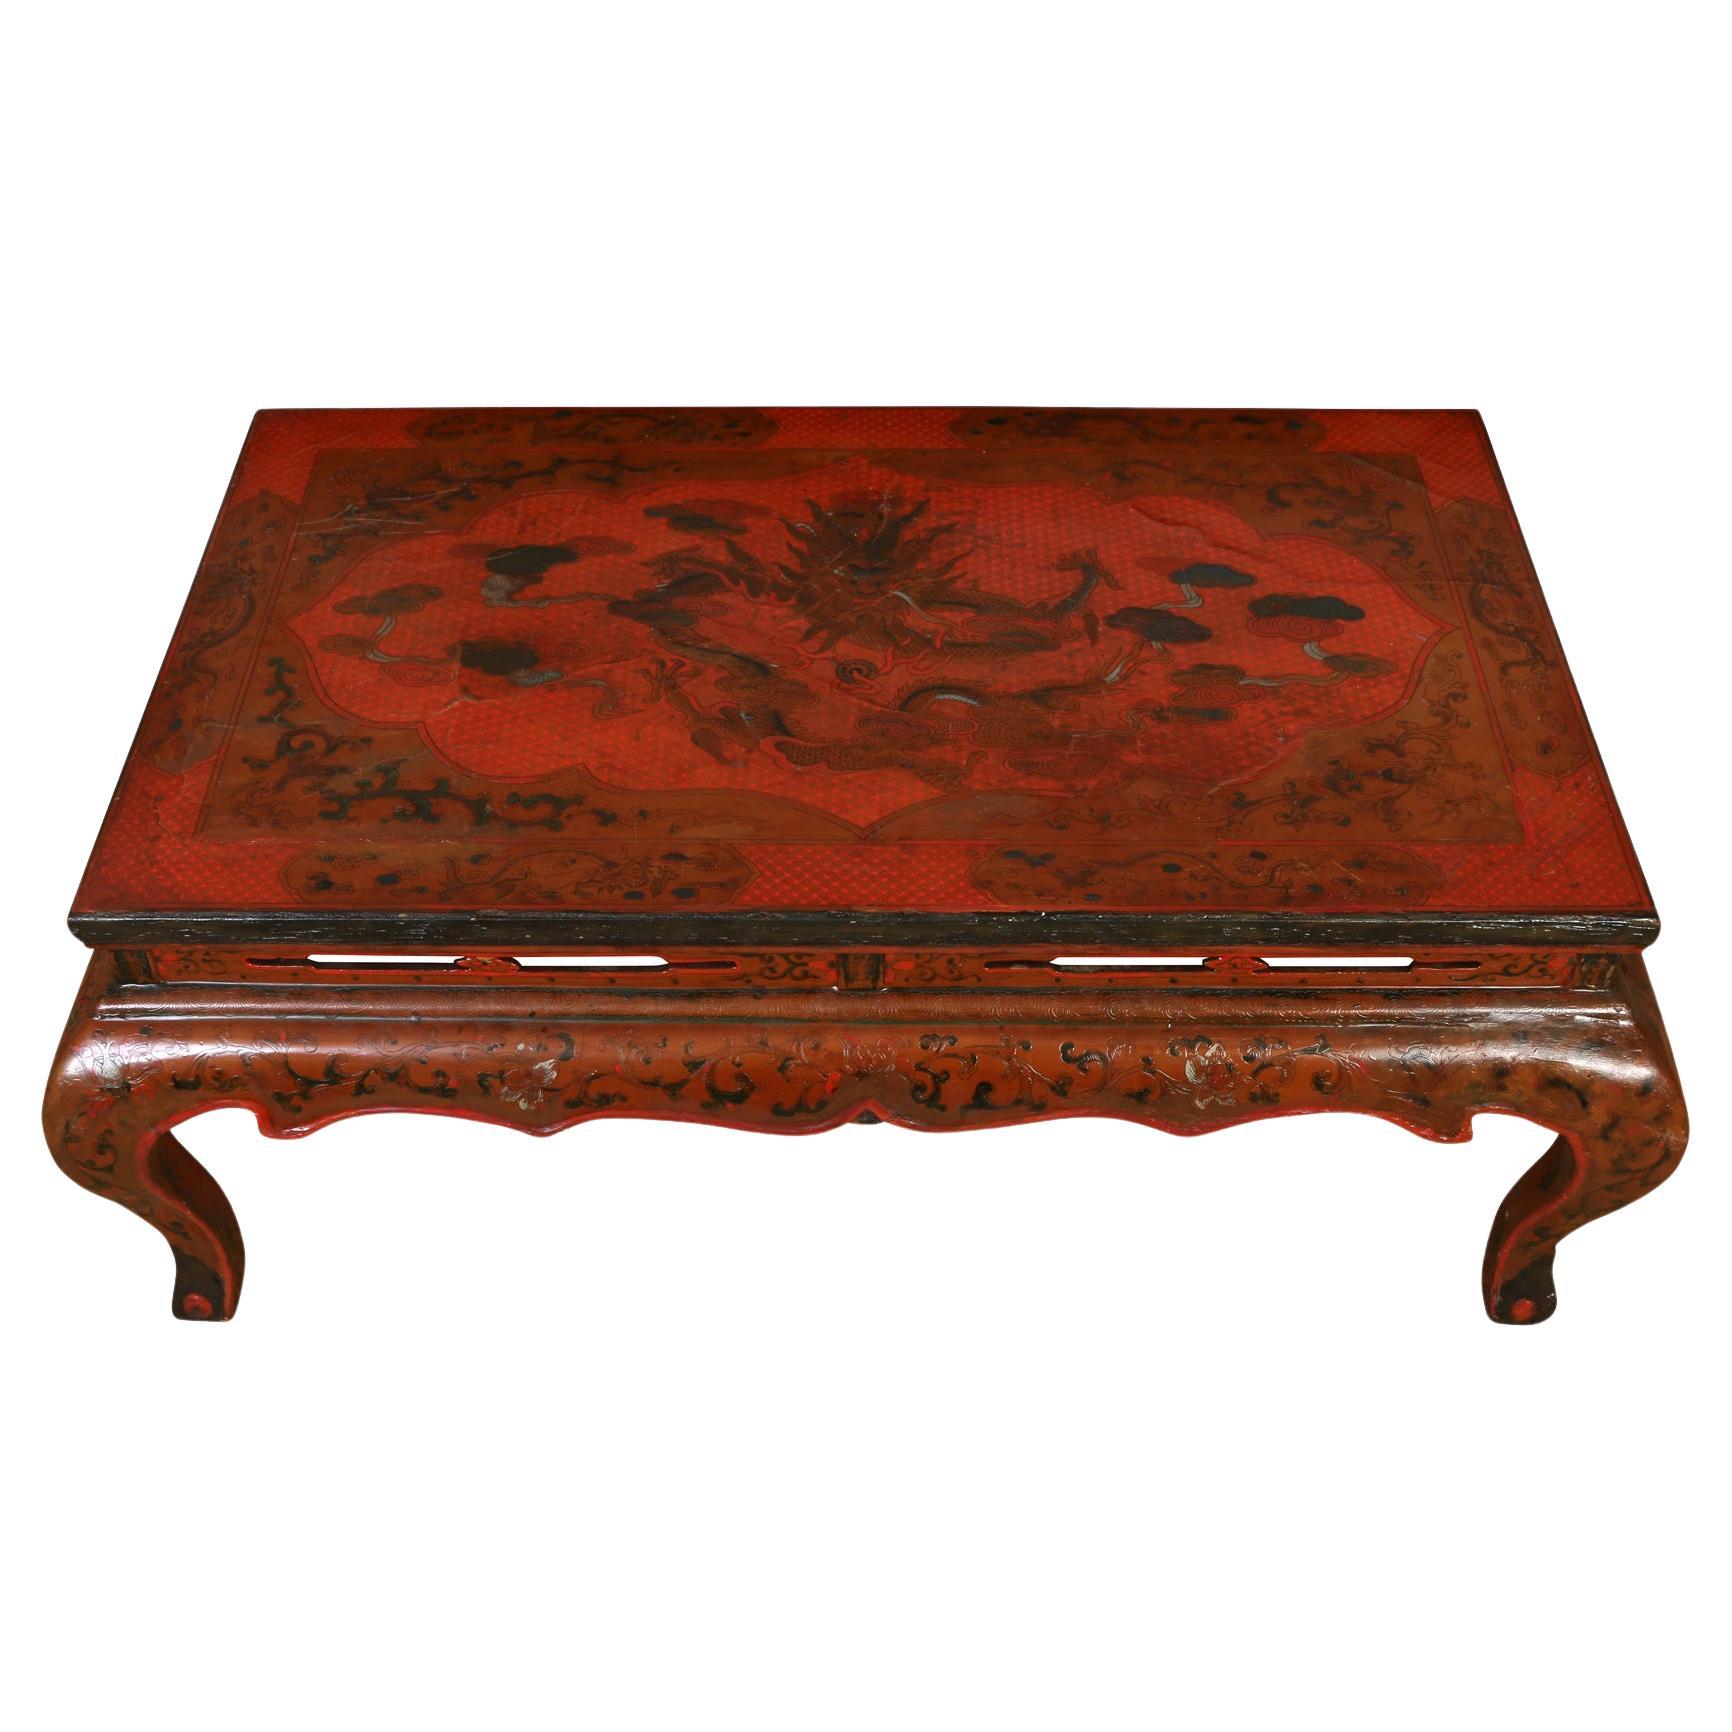 Chinese Red Dragon Motif Coromandel Lacquer Coffee Table